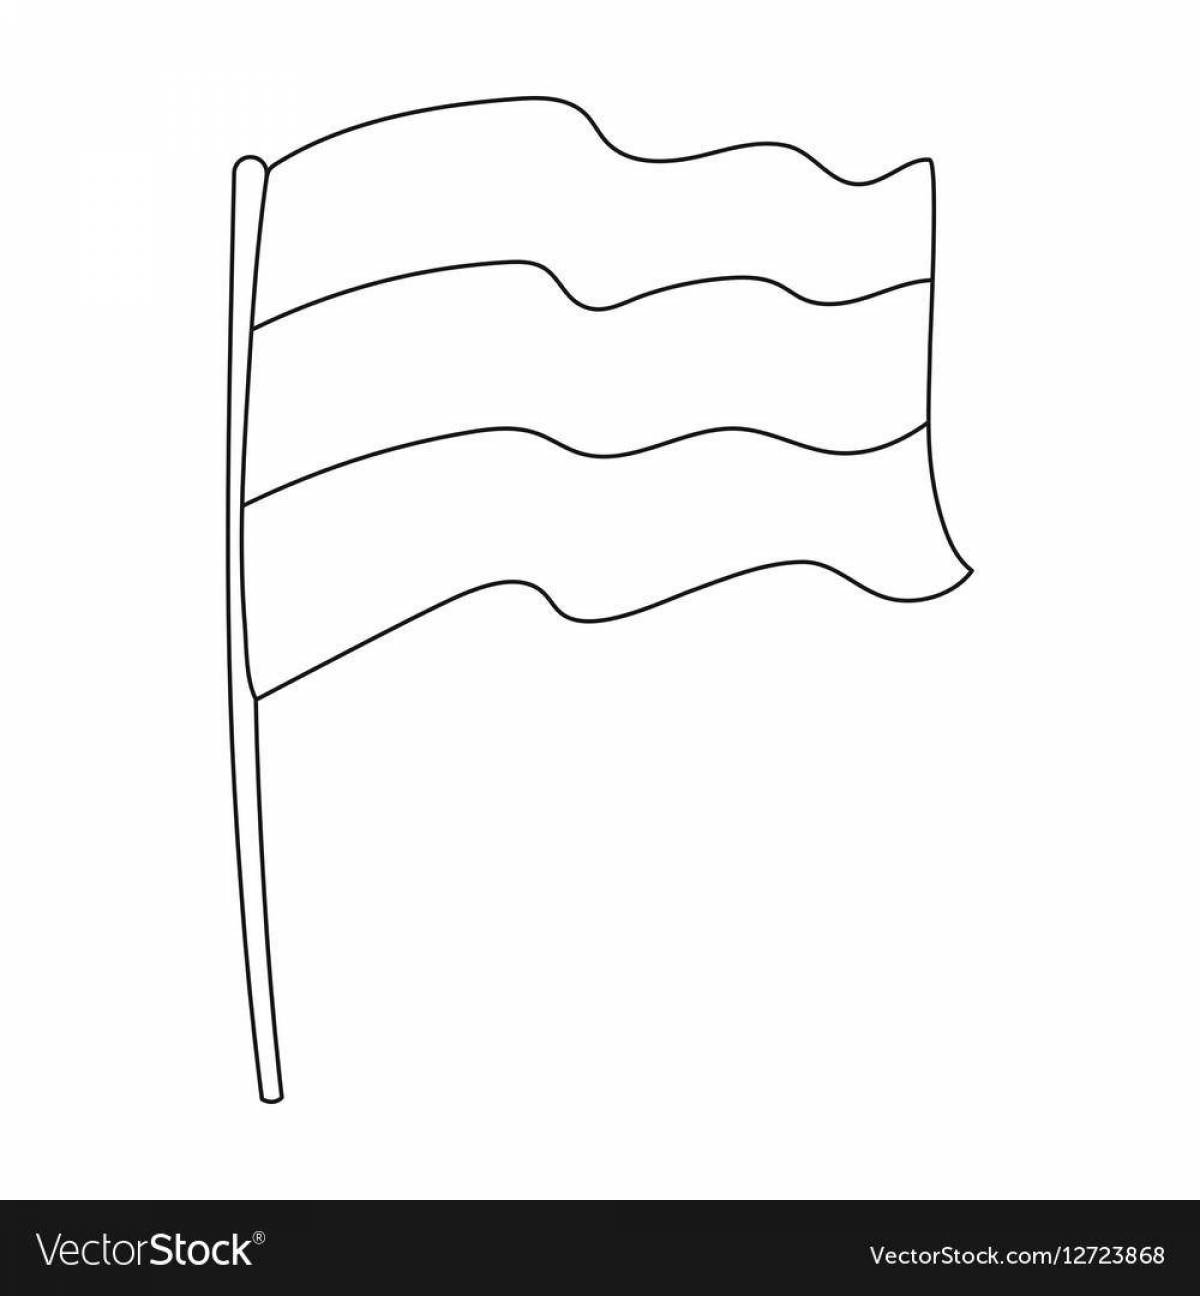 Dagestan flag coloring page